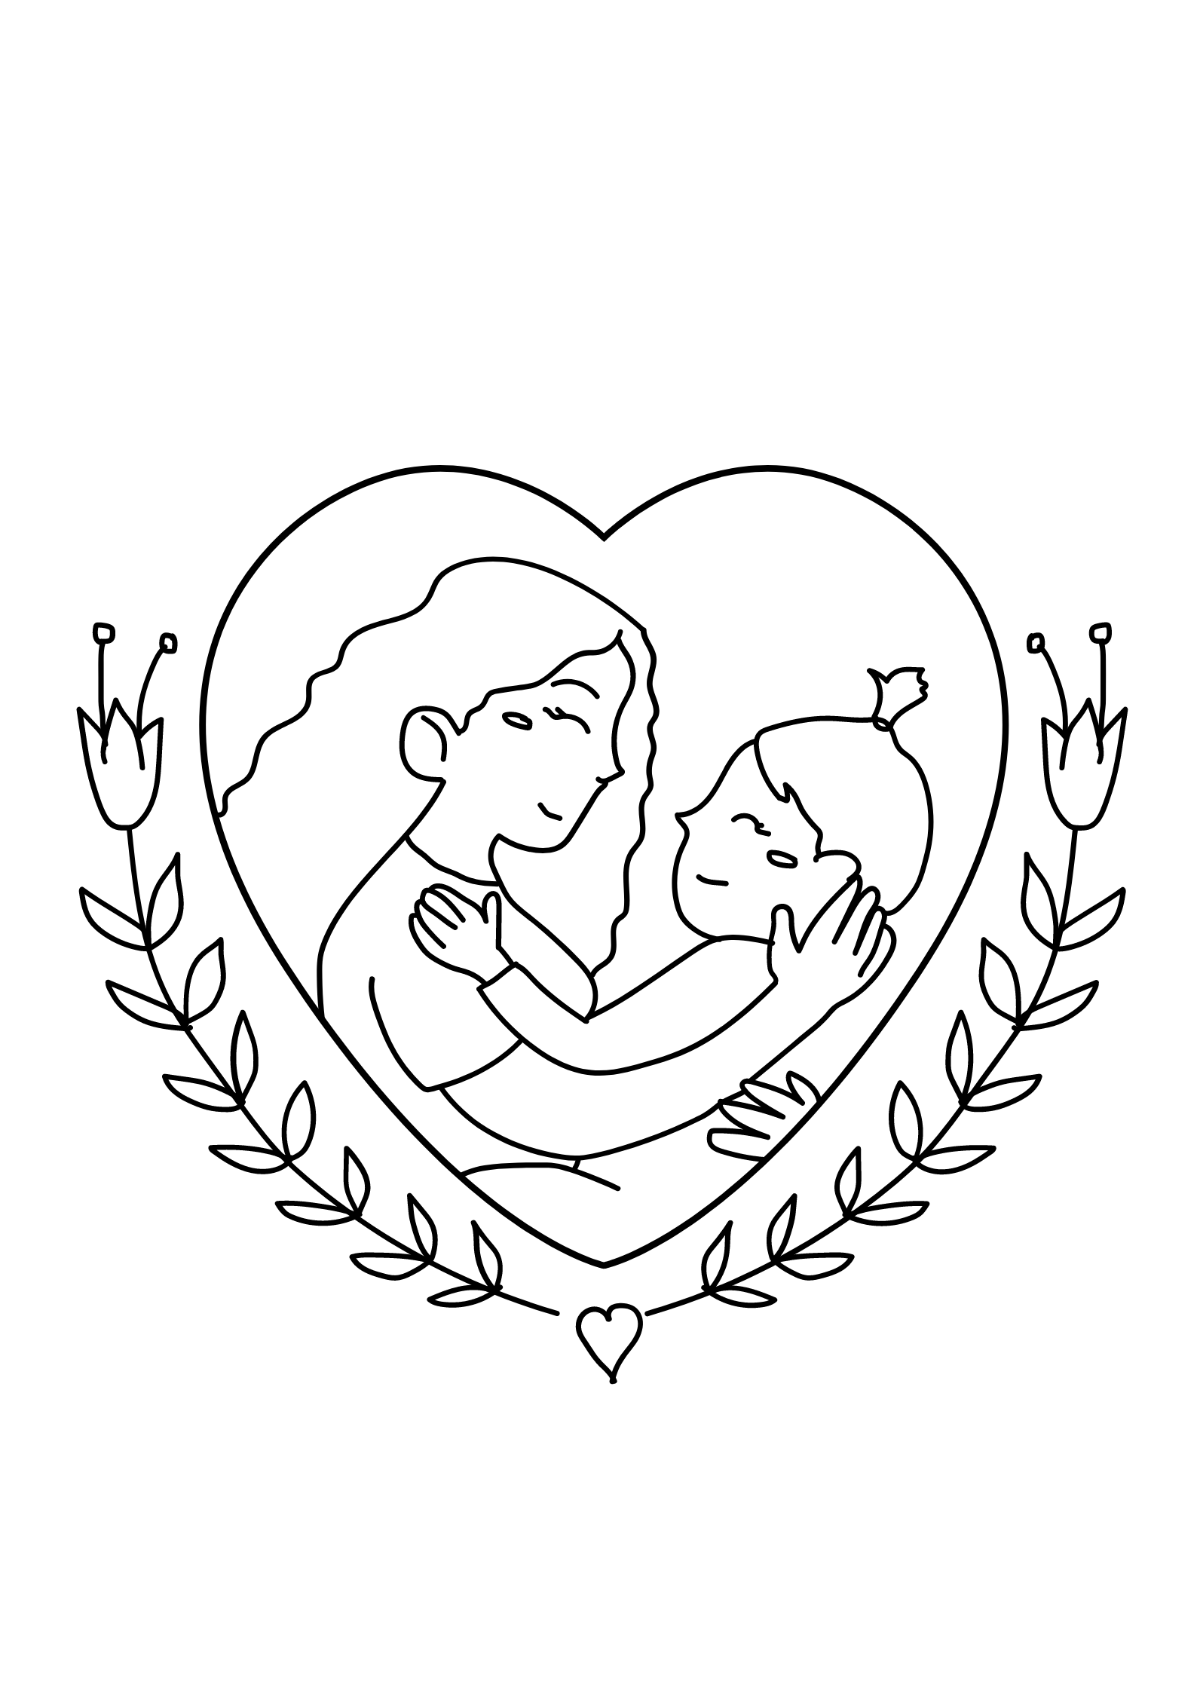 Mother's Day Image Drawing Template